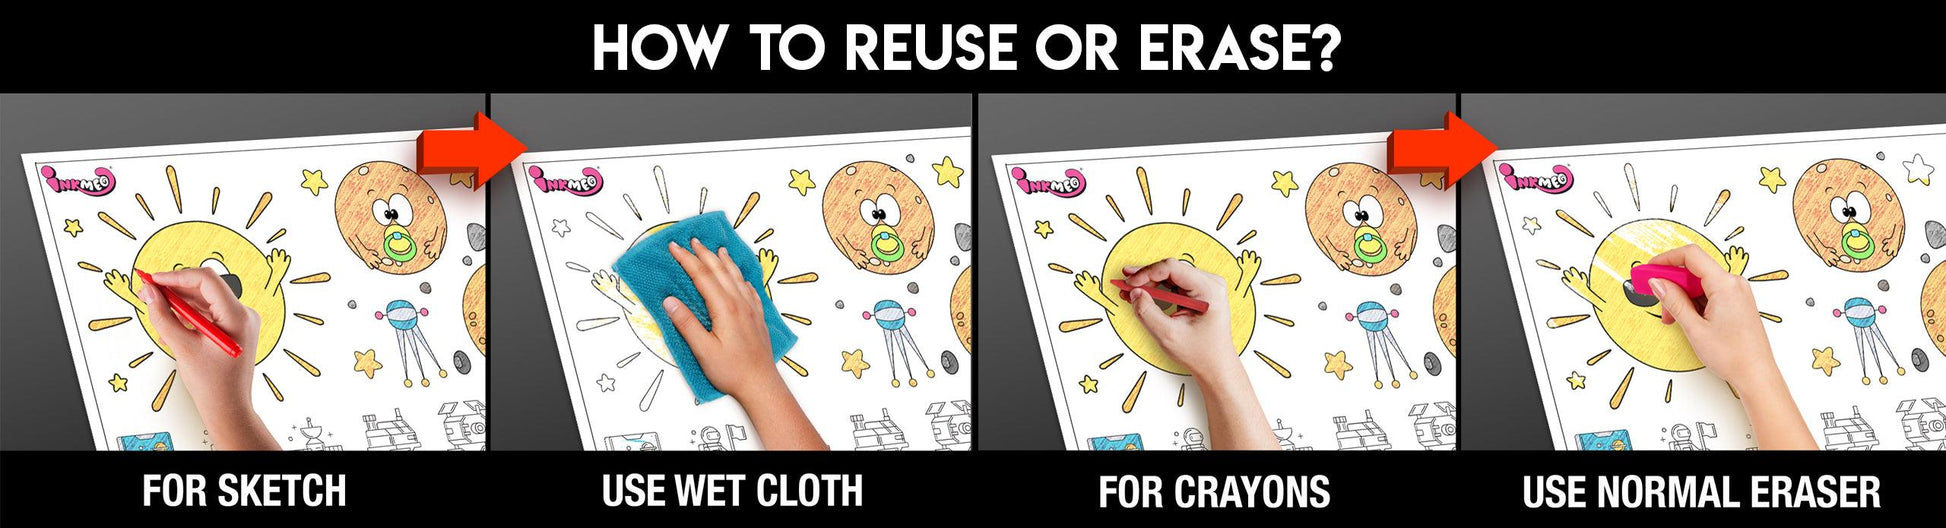 The image has a black background with four pictures demonstrating how to reuse or erase: the first picture depicts sketching on the vegetable sheet, the second shows using a wet cloth to remove sketches, the third image displays crayons colouring on the vegetable sheet, and the fourth image illustrates erasing crayons with a regular eraser.